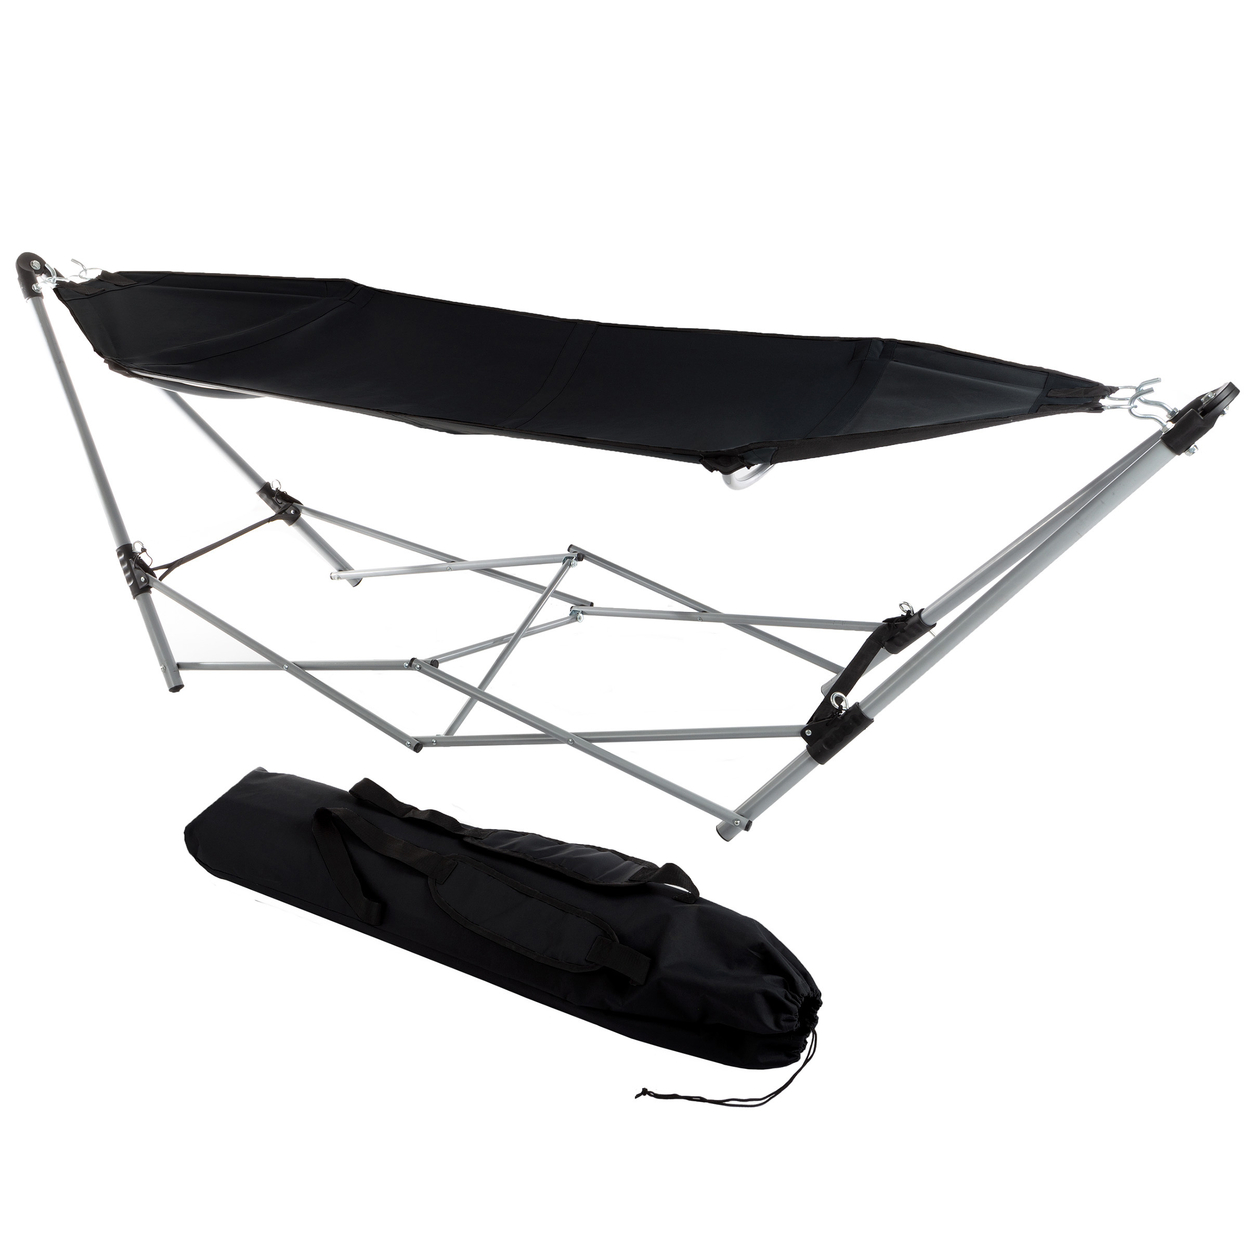 Portable Hammock With Stand Adult Size Camping Backyard Holds 250 Pounds